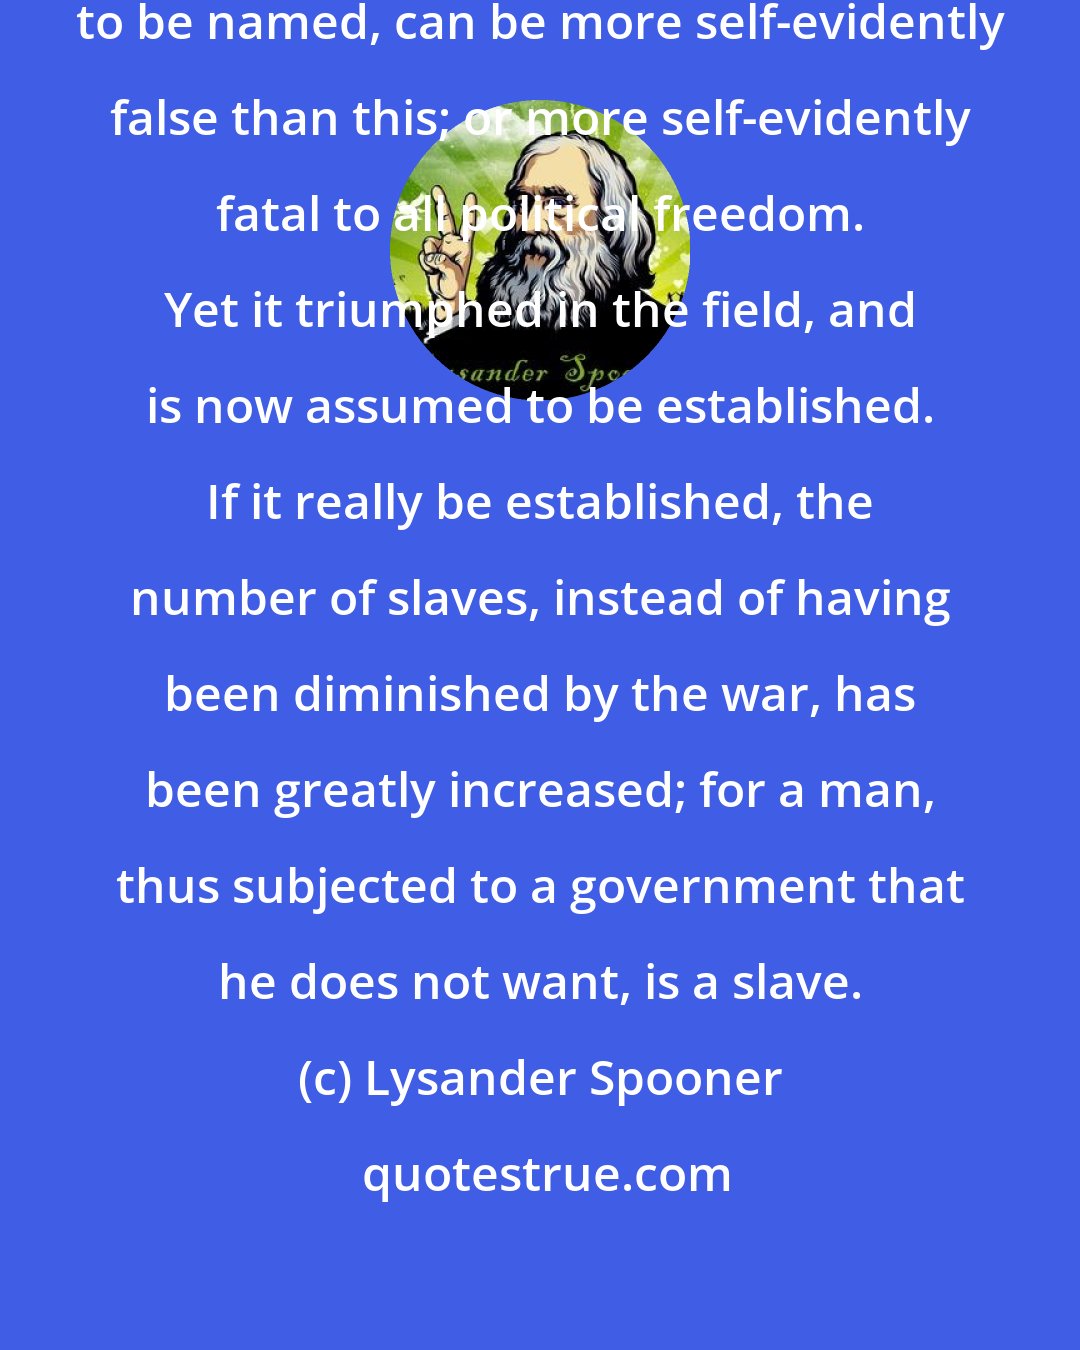 Lysander Spooner: No principle, that is possible to be named, can be more self-evidently false than this; or more self-evidently fatal to all political freedom. Yet it triumphed in the field, and is now assumed to be established. If it really be established, the number of slaves, instead of having been diminished by the war, has been greatly increased; for a man, thus subjected to a government that he does not want, is a slave.